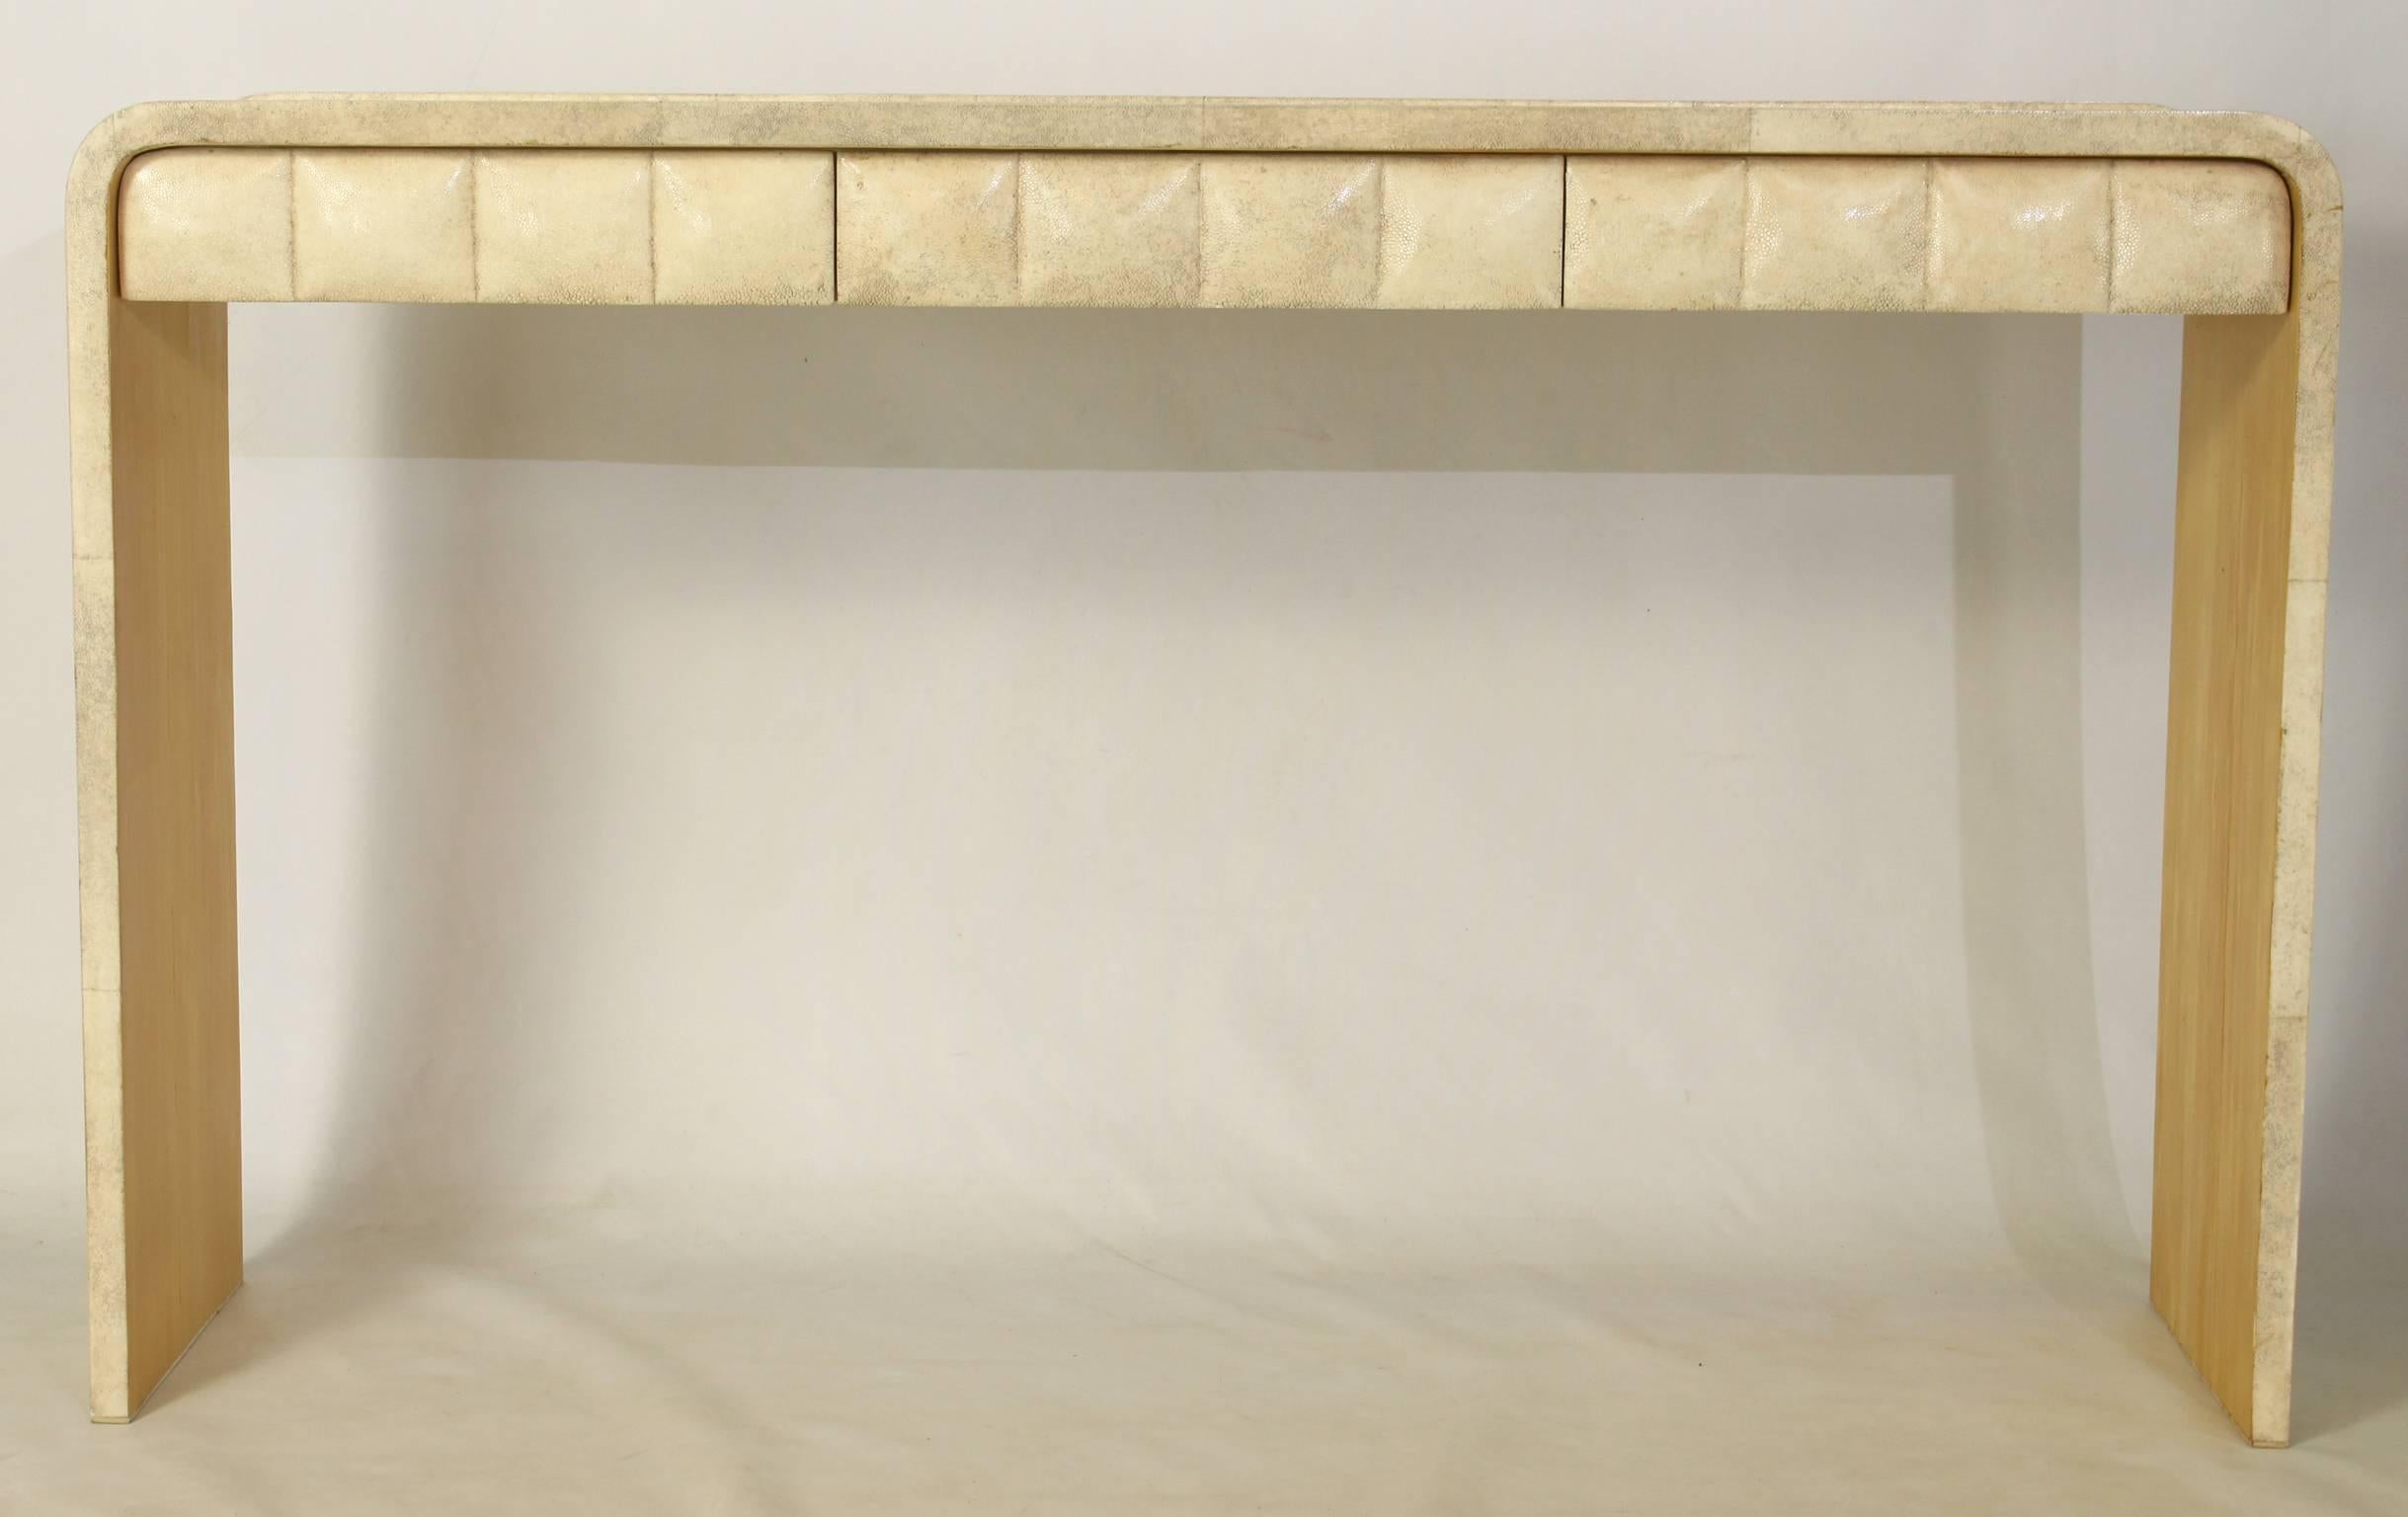 An elegant Art Deco inspired shagreen and parchment covered console table made in Paris in the 1980s by R & Y Augousti.